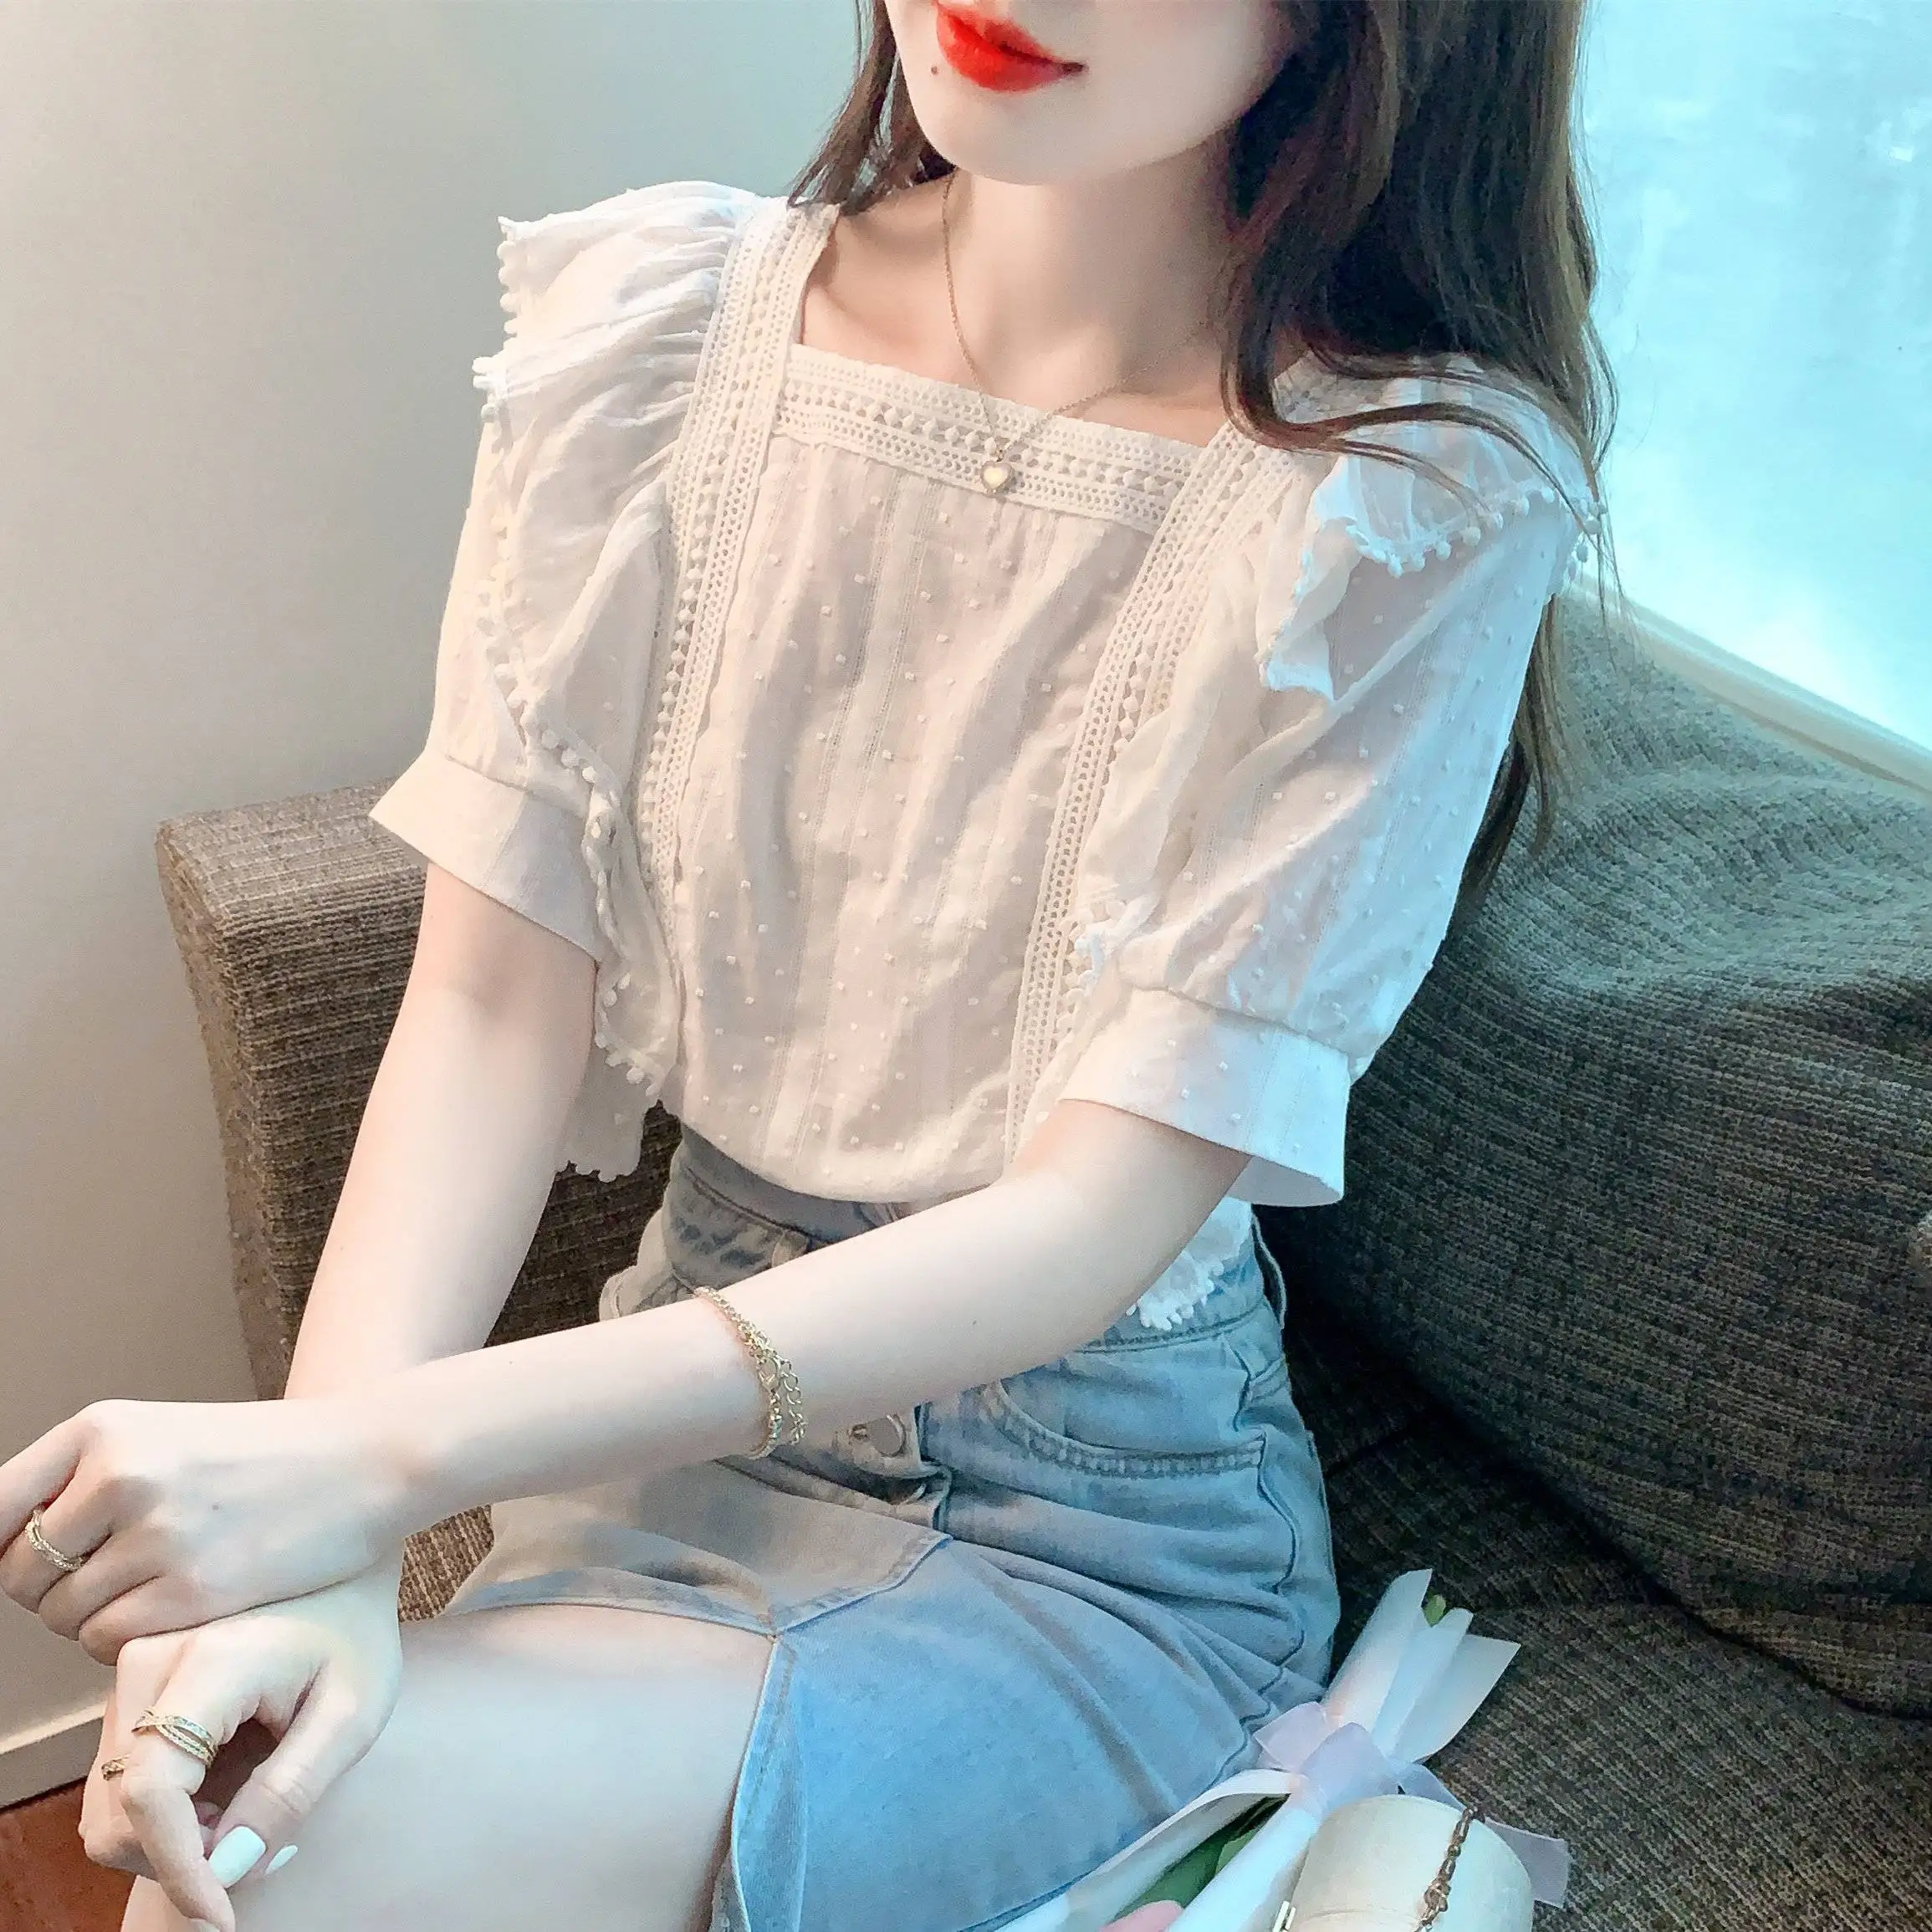 

COIGARSAM Blouse Women Summer 2022 New Ruffles Short Sleeve Chiffon Square Collar Blusas Womens Tops And Blouses Dropshipping